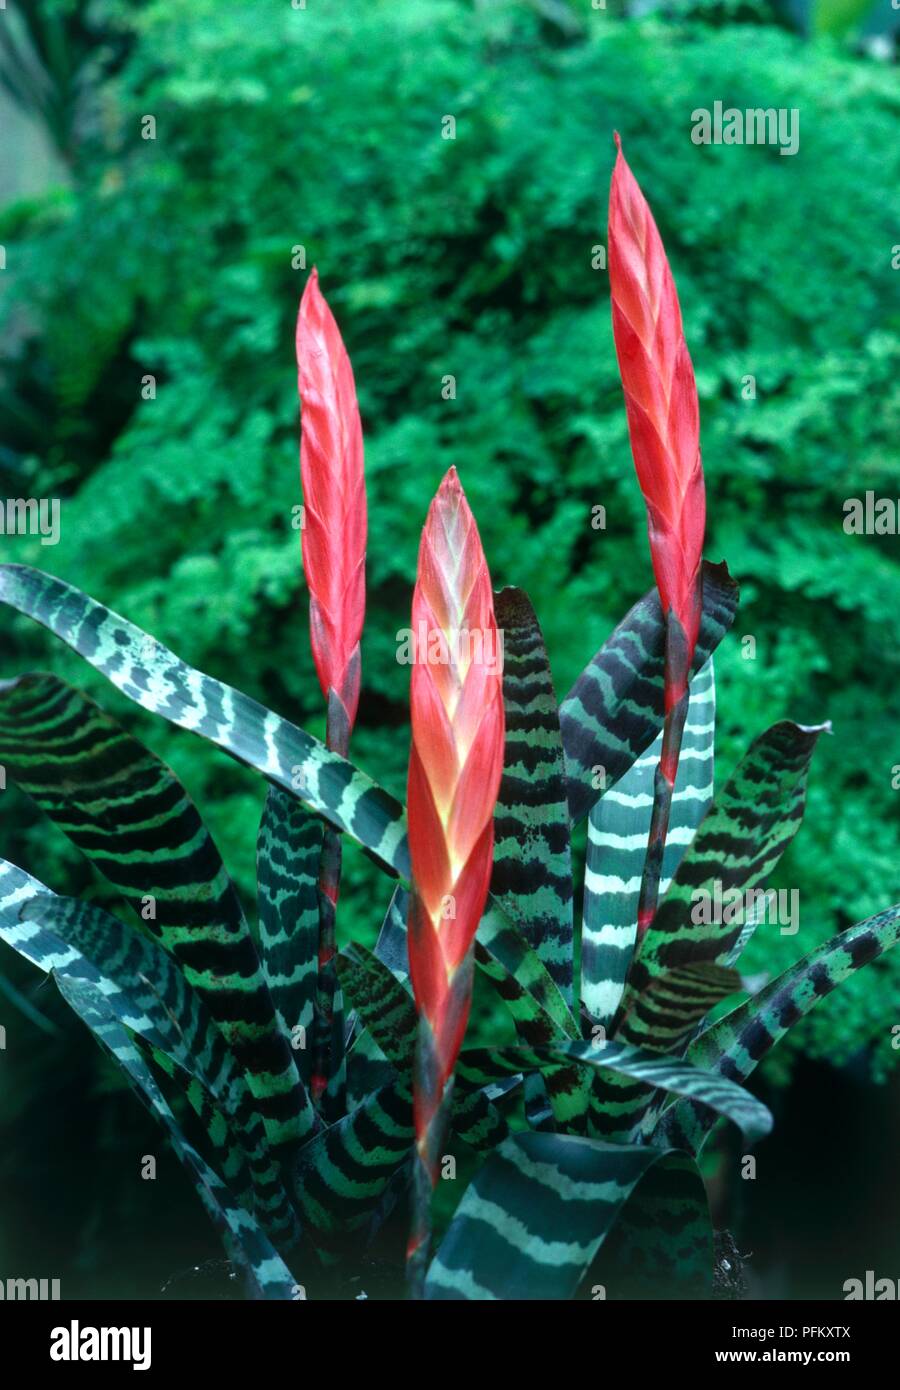 Three red flowers and striped green leaves from Vriesea splendens (Flaming sword), close-up Stock Photo